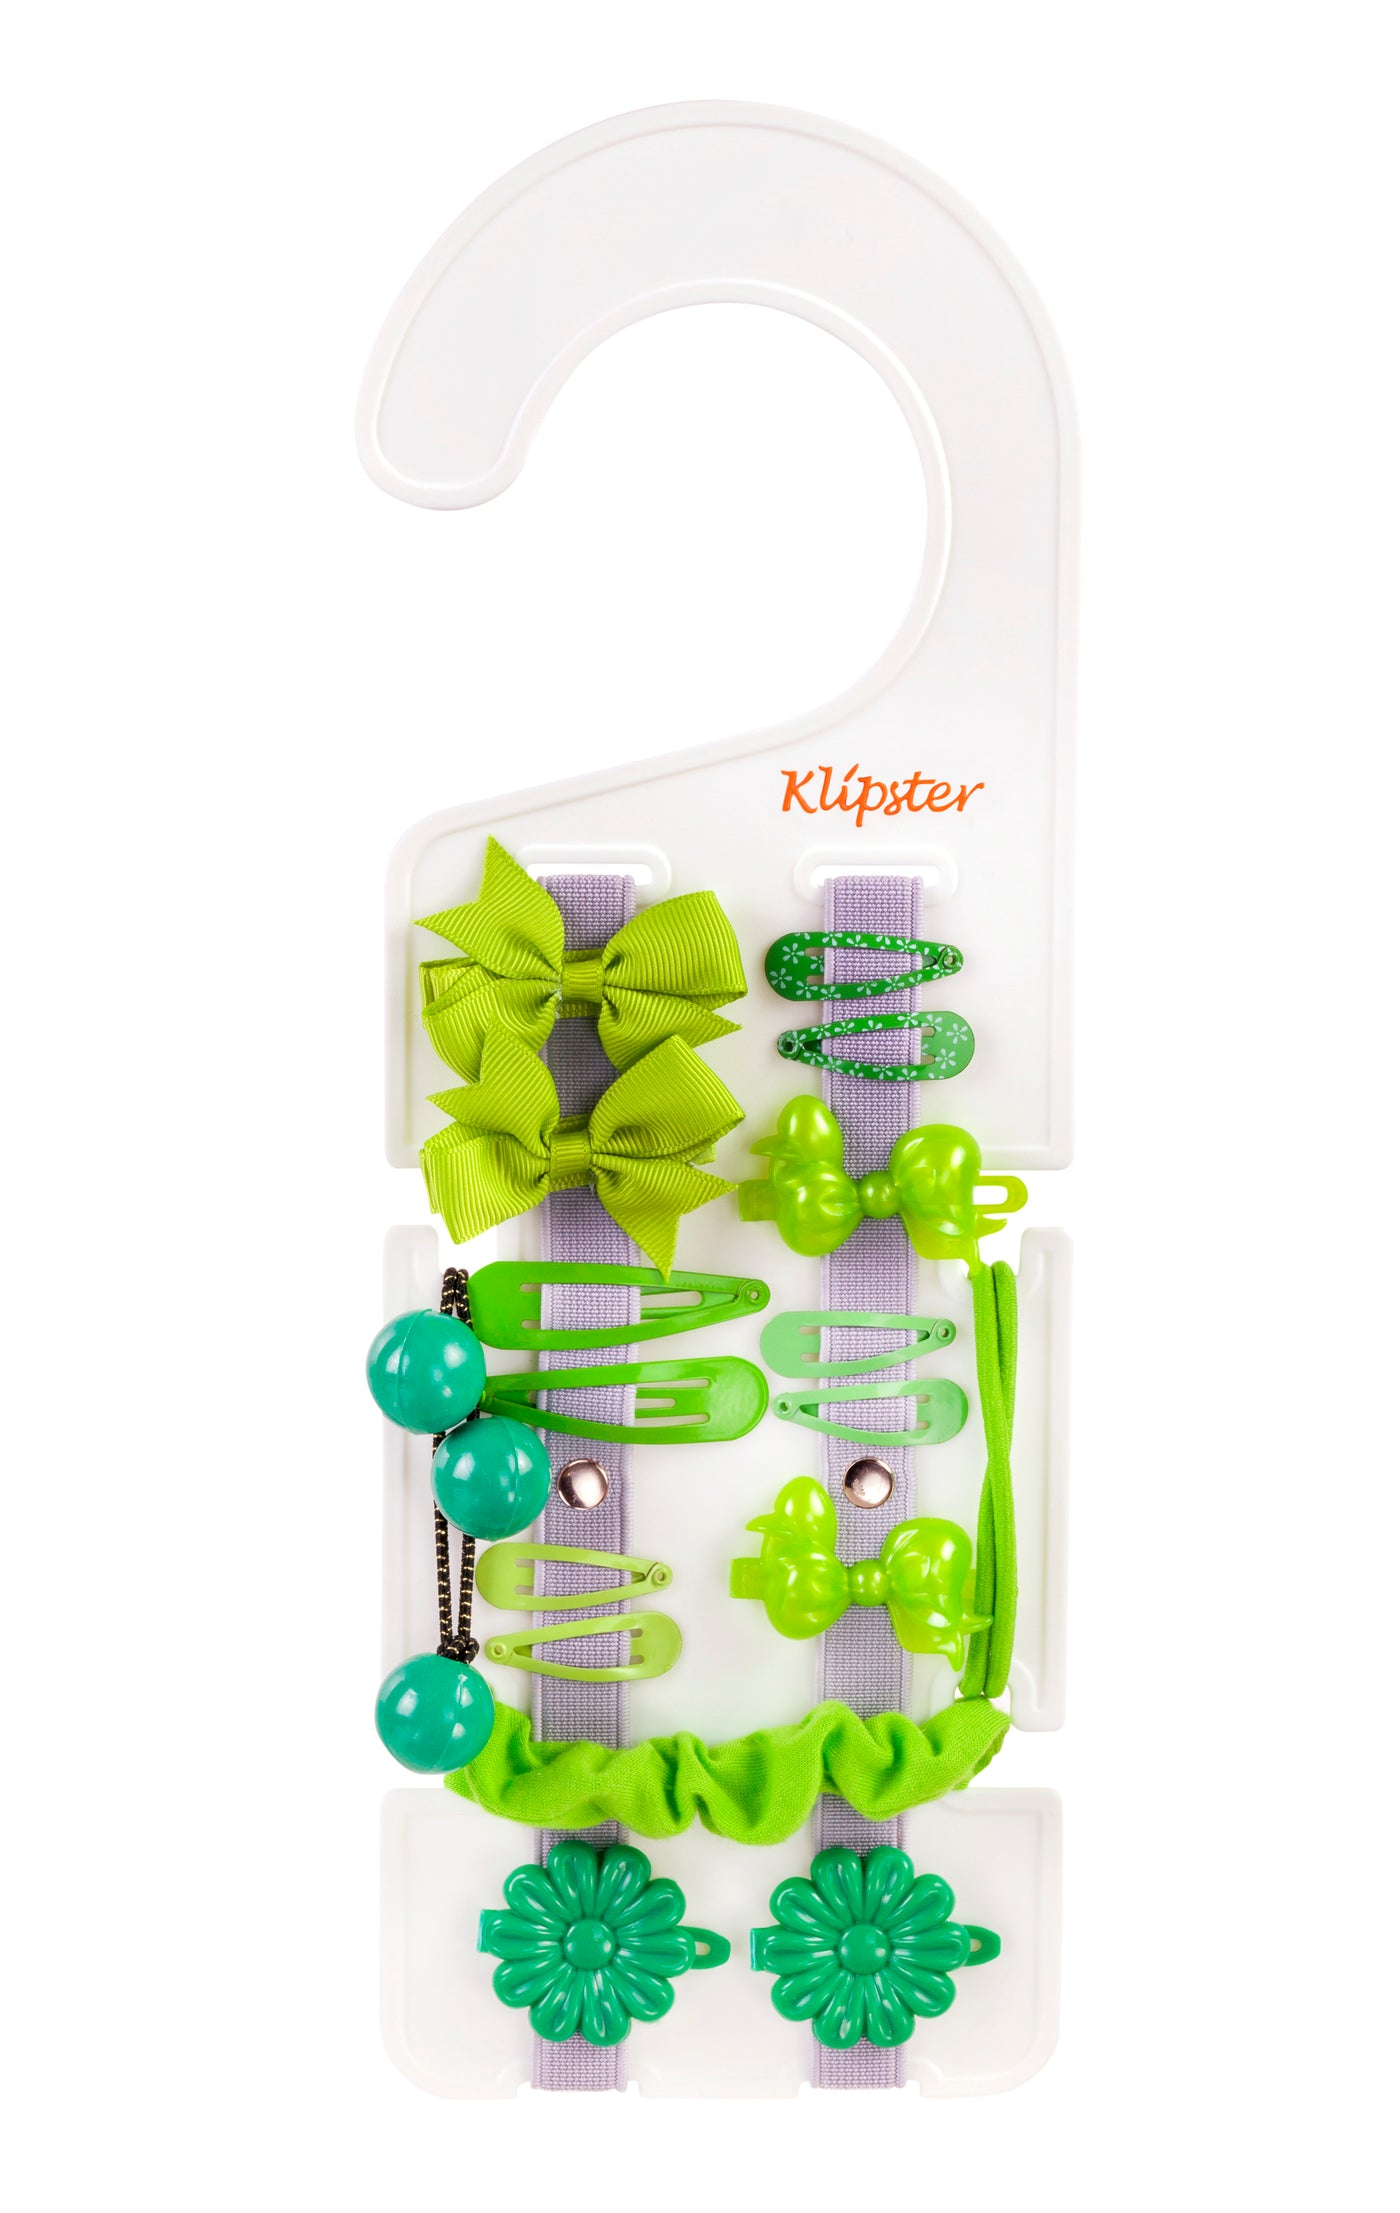 Classic Klipster Hair Accessories Organizers are double-sided, lightweight, compact, and portable. They hold hair clips, hair bows, scrunchies, hair ties, and more.